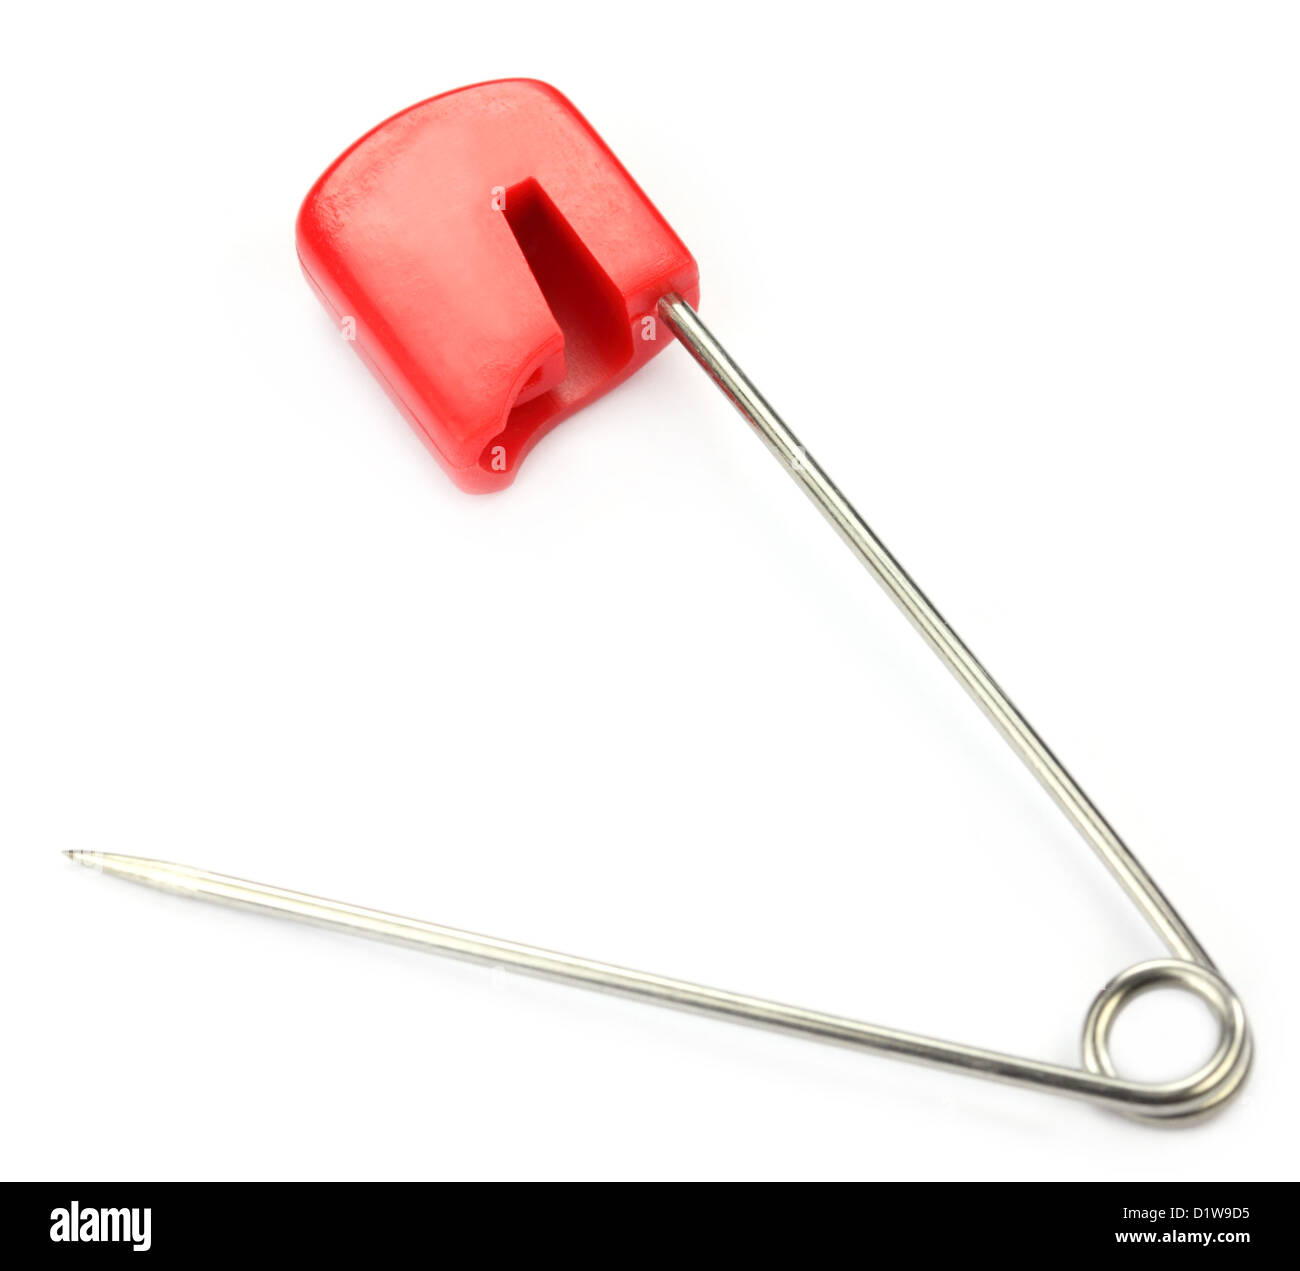 Red safety pin Stock Photo